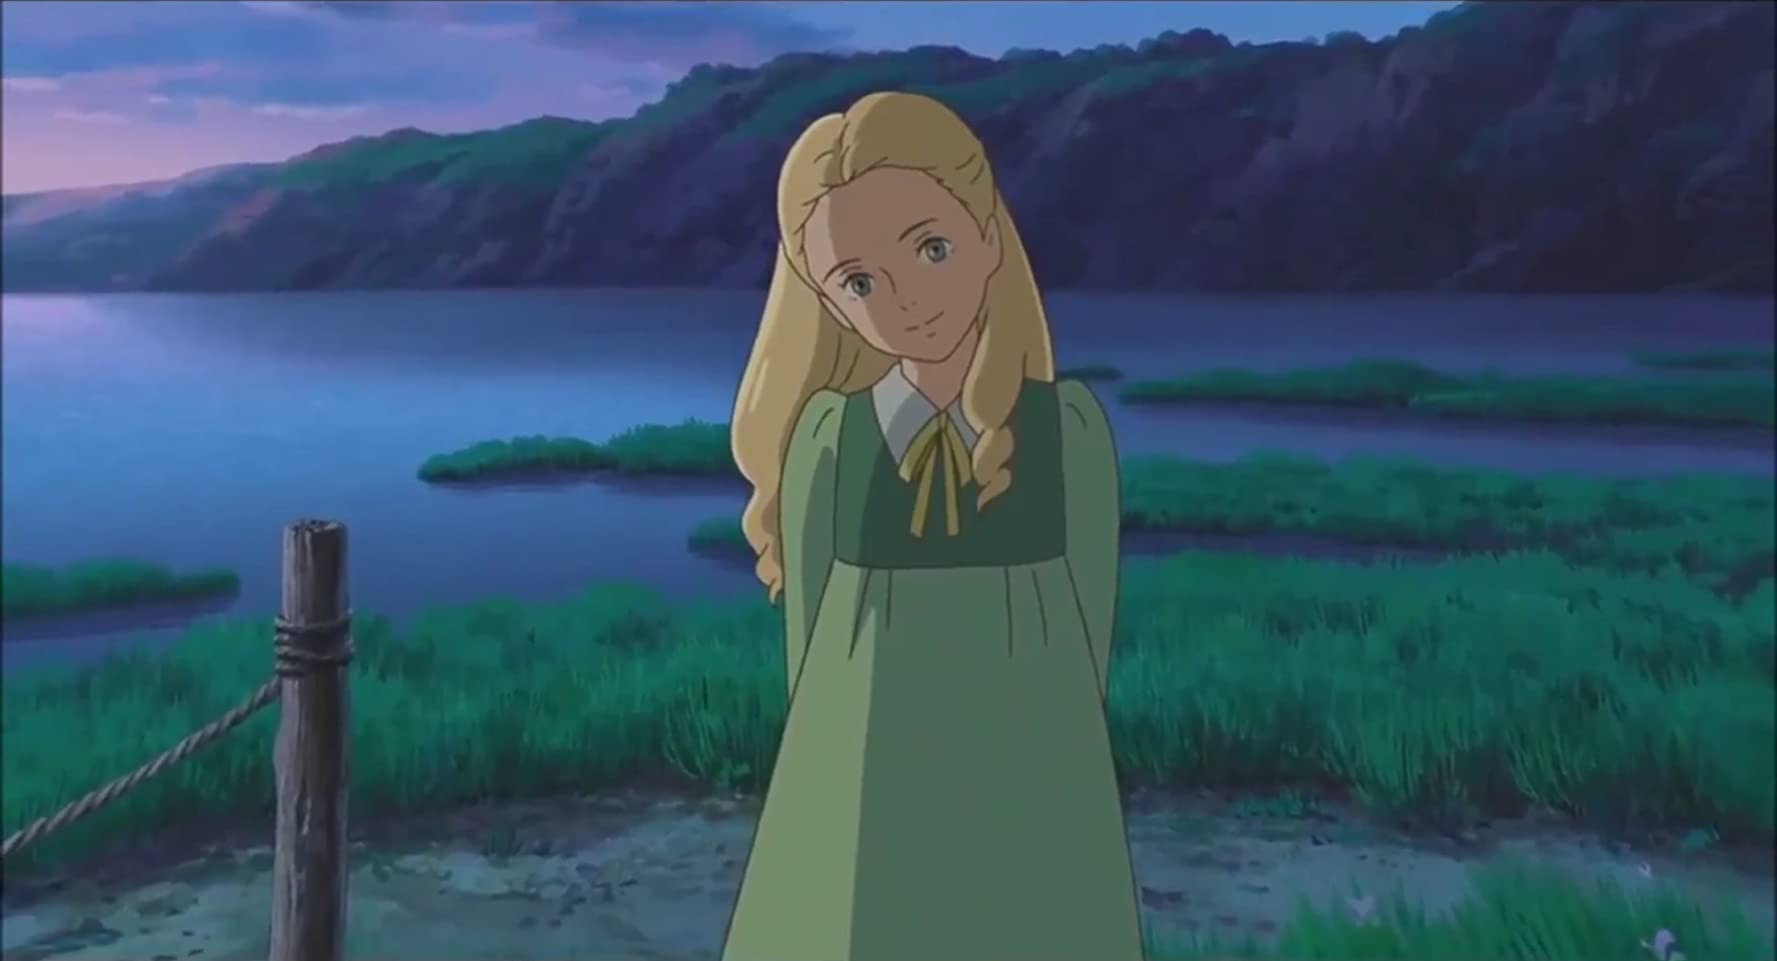 When marnie was there